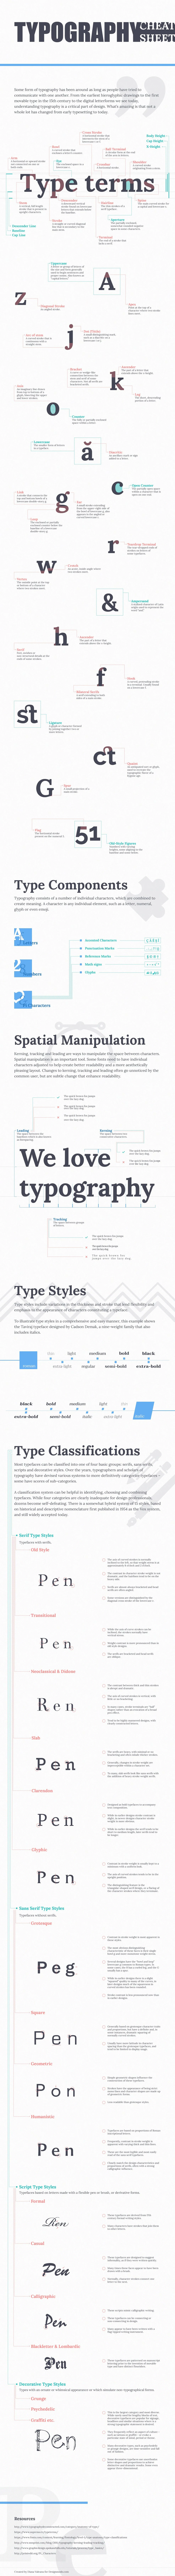 Typography Cheat Sheet - #Infographic